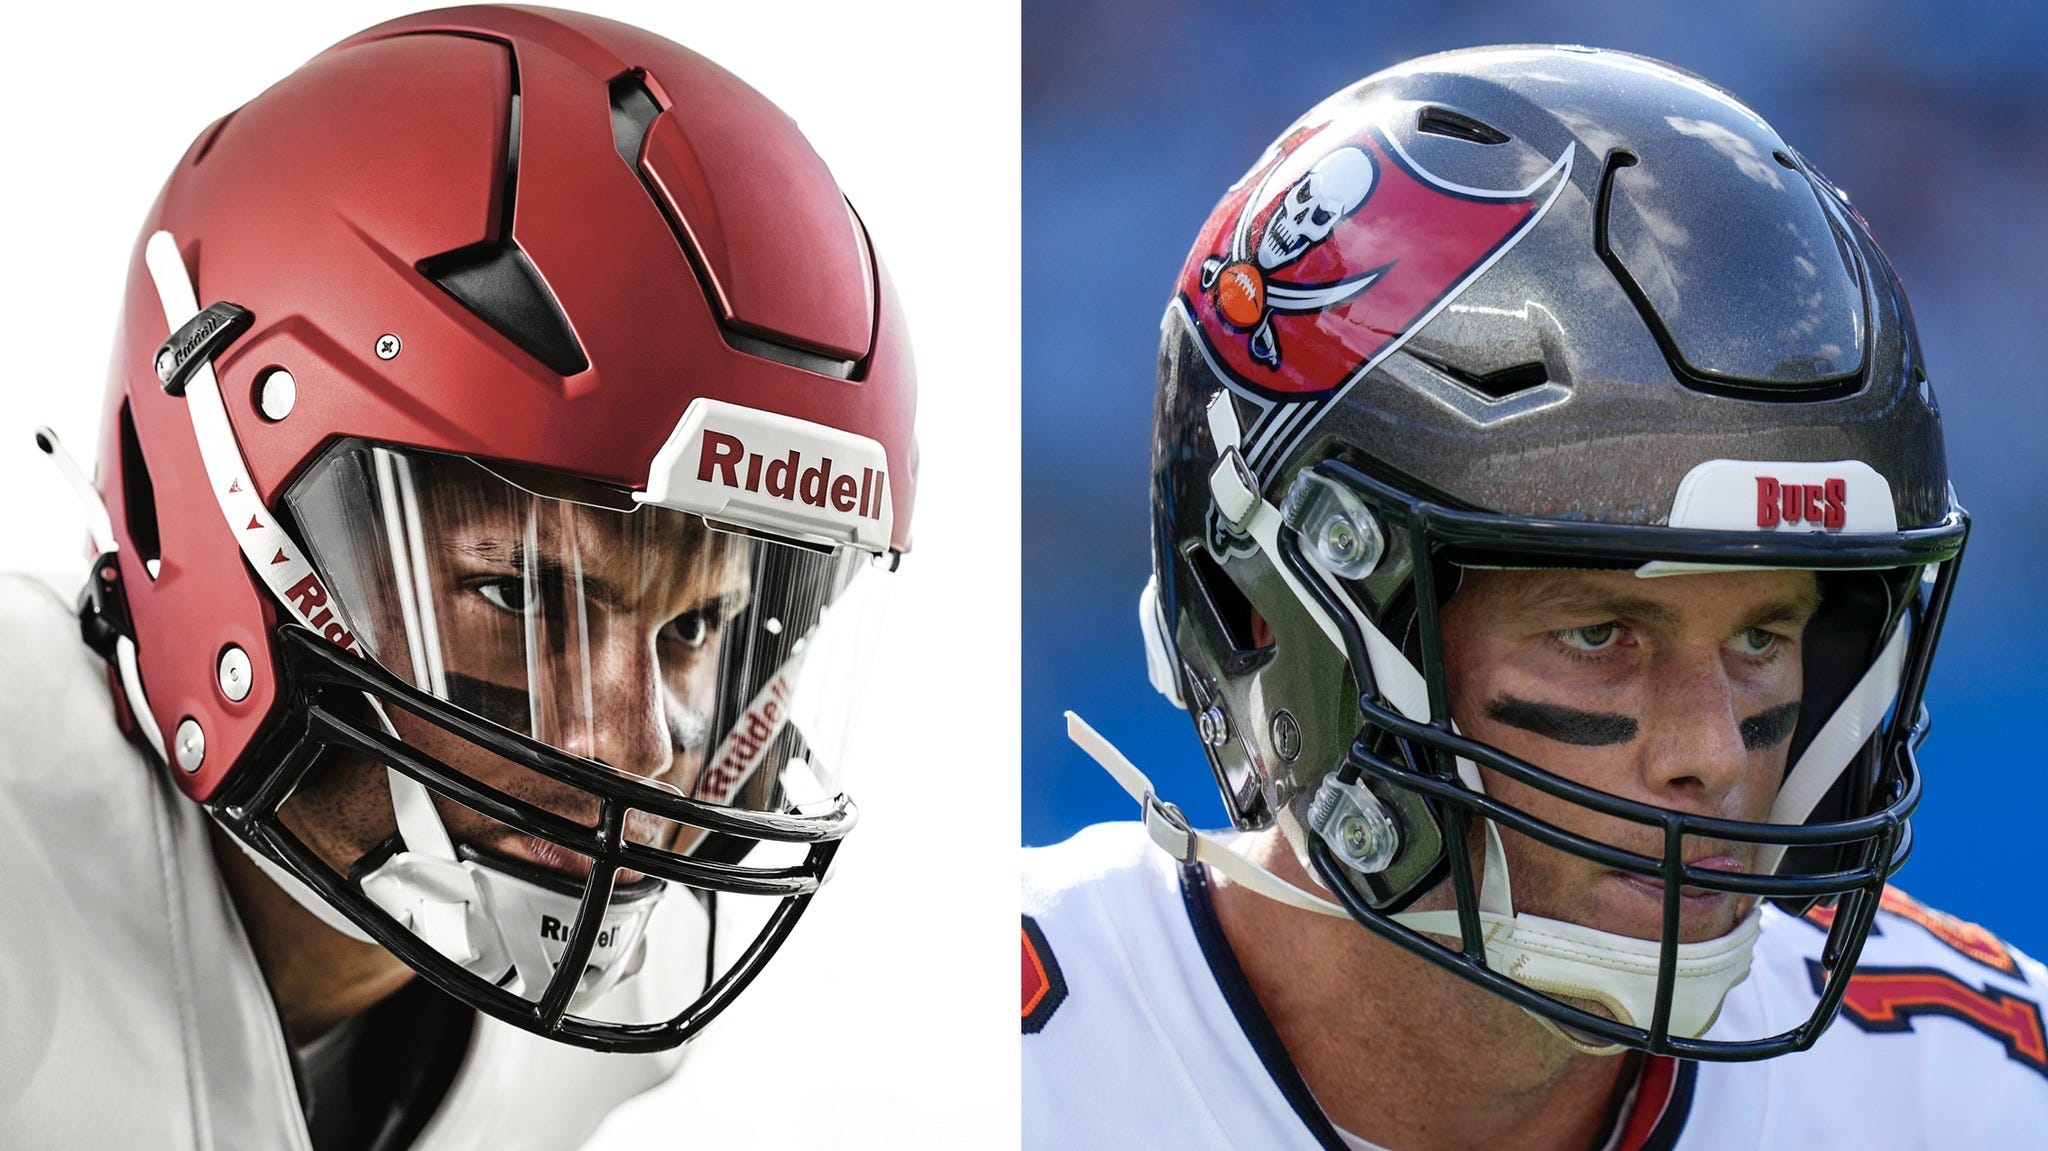 Riddell launches Axiom, latest helmet to combat concussions